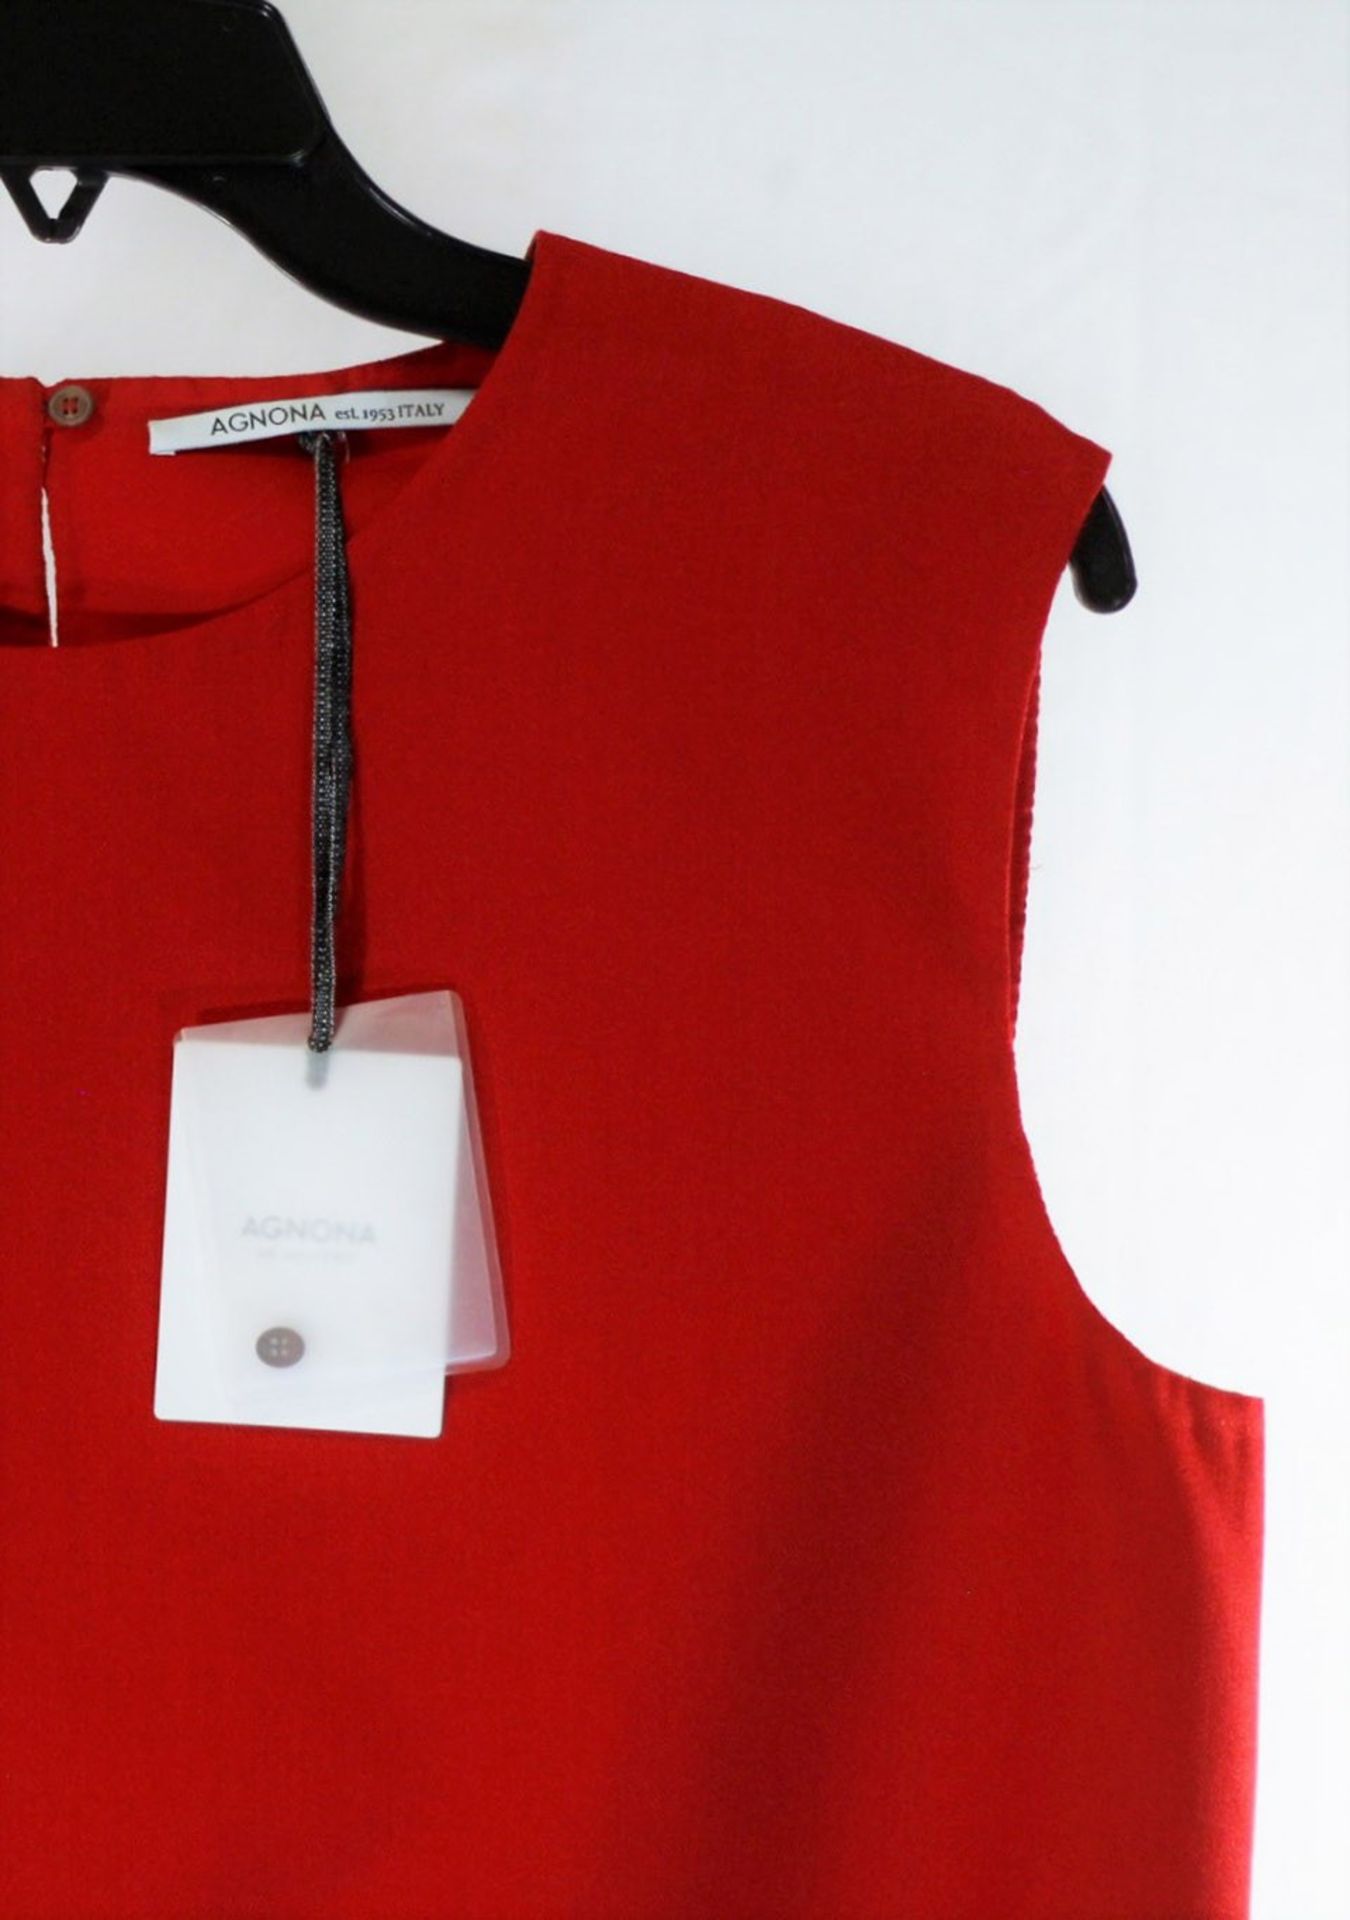 1 x Agnona Red Vest - Size: 18 - Material: 50% Cotton, 28% Mohair, 18% Silk, 4% Wool. Details 55% - Image 4 of 8